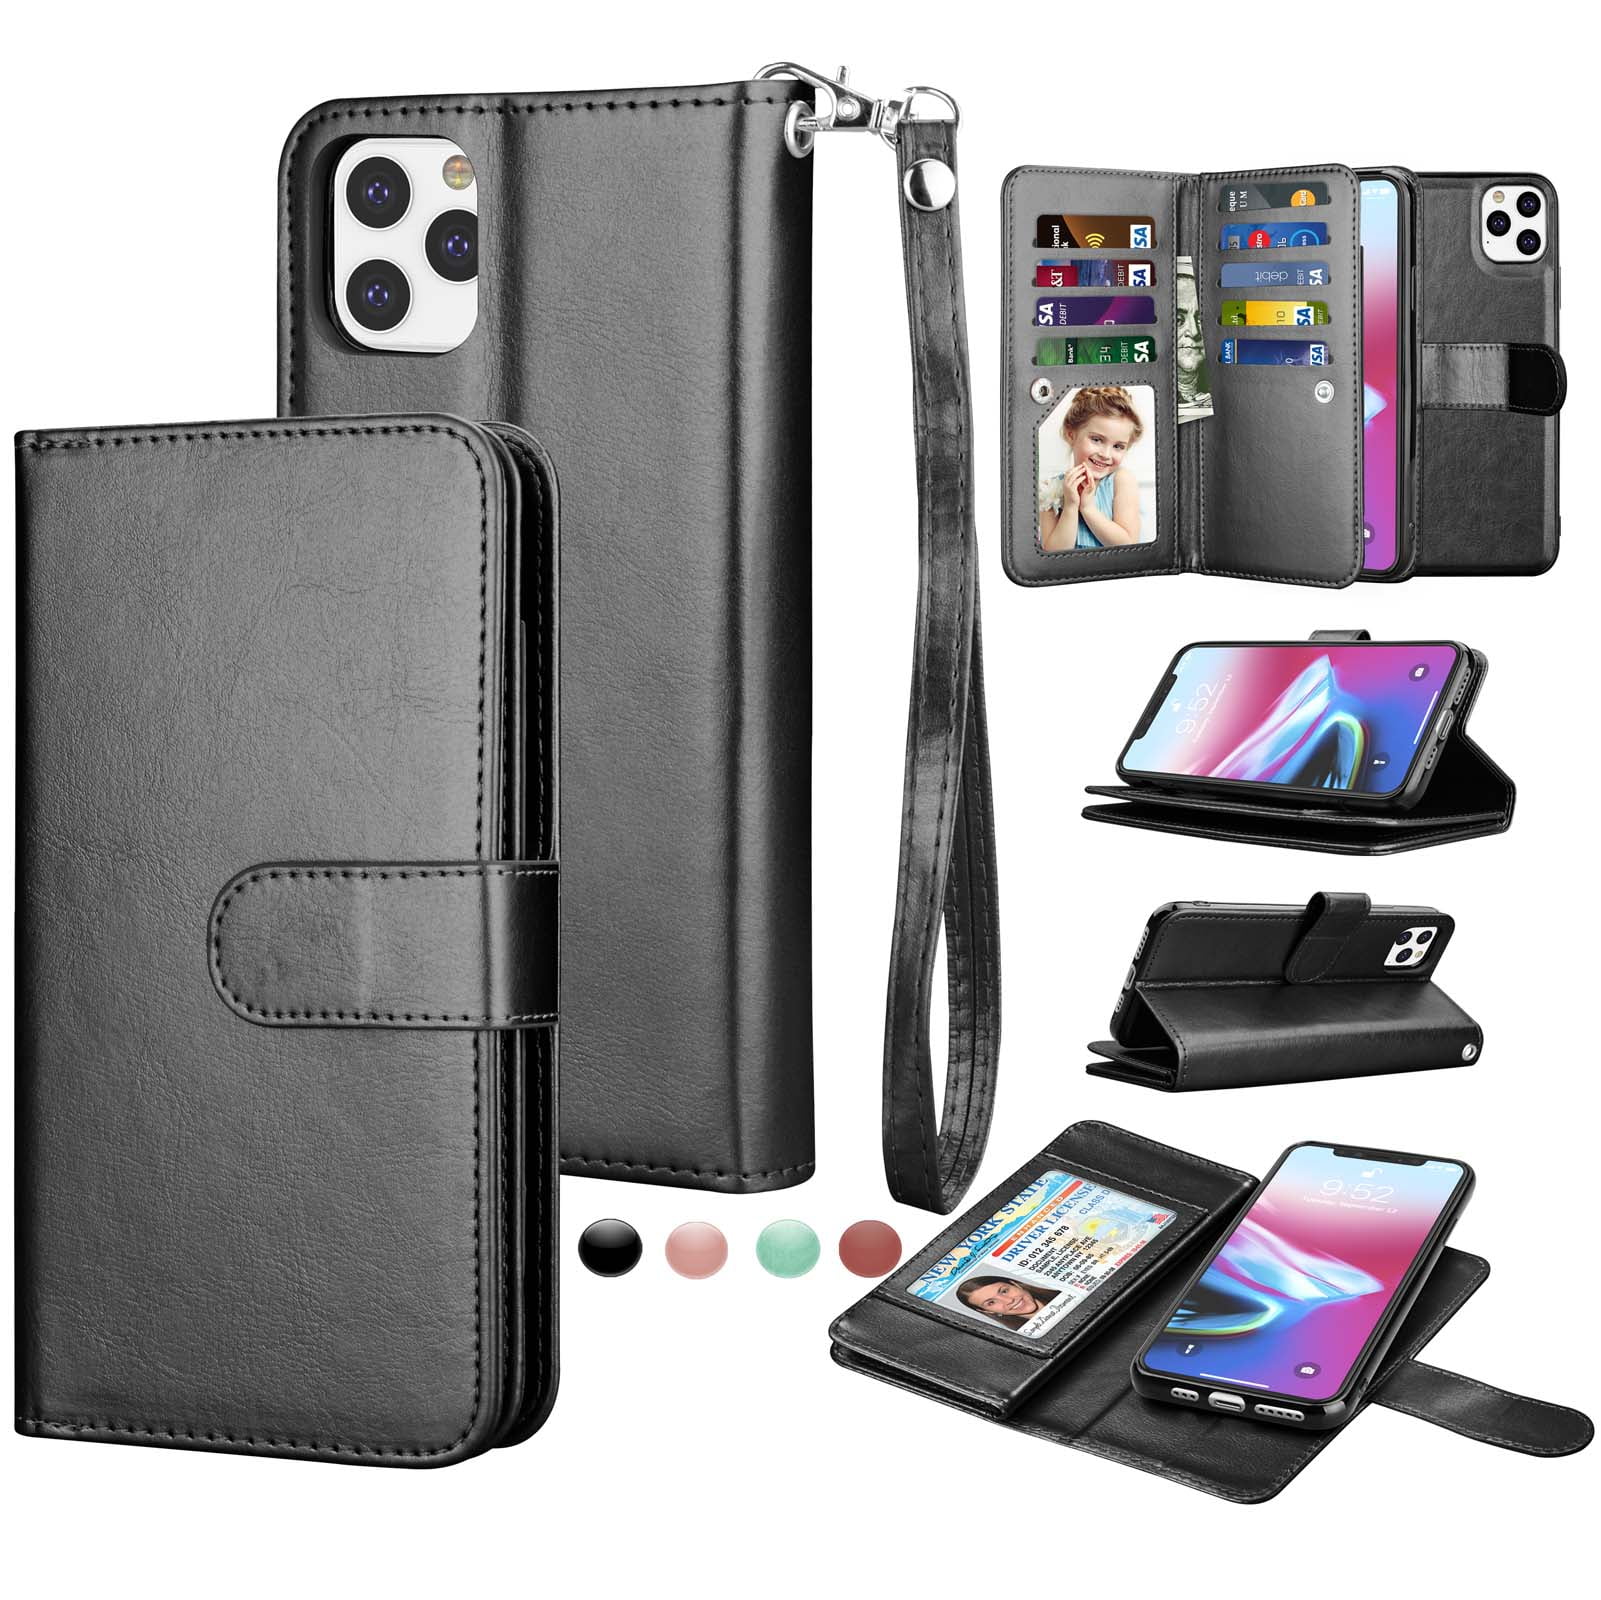 Flip Case for iPhone 11 Pro Max Compatible with iPhone 11 Pro Max black PU Leather Cover